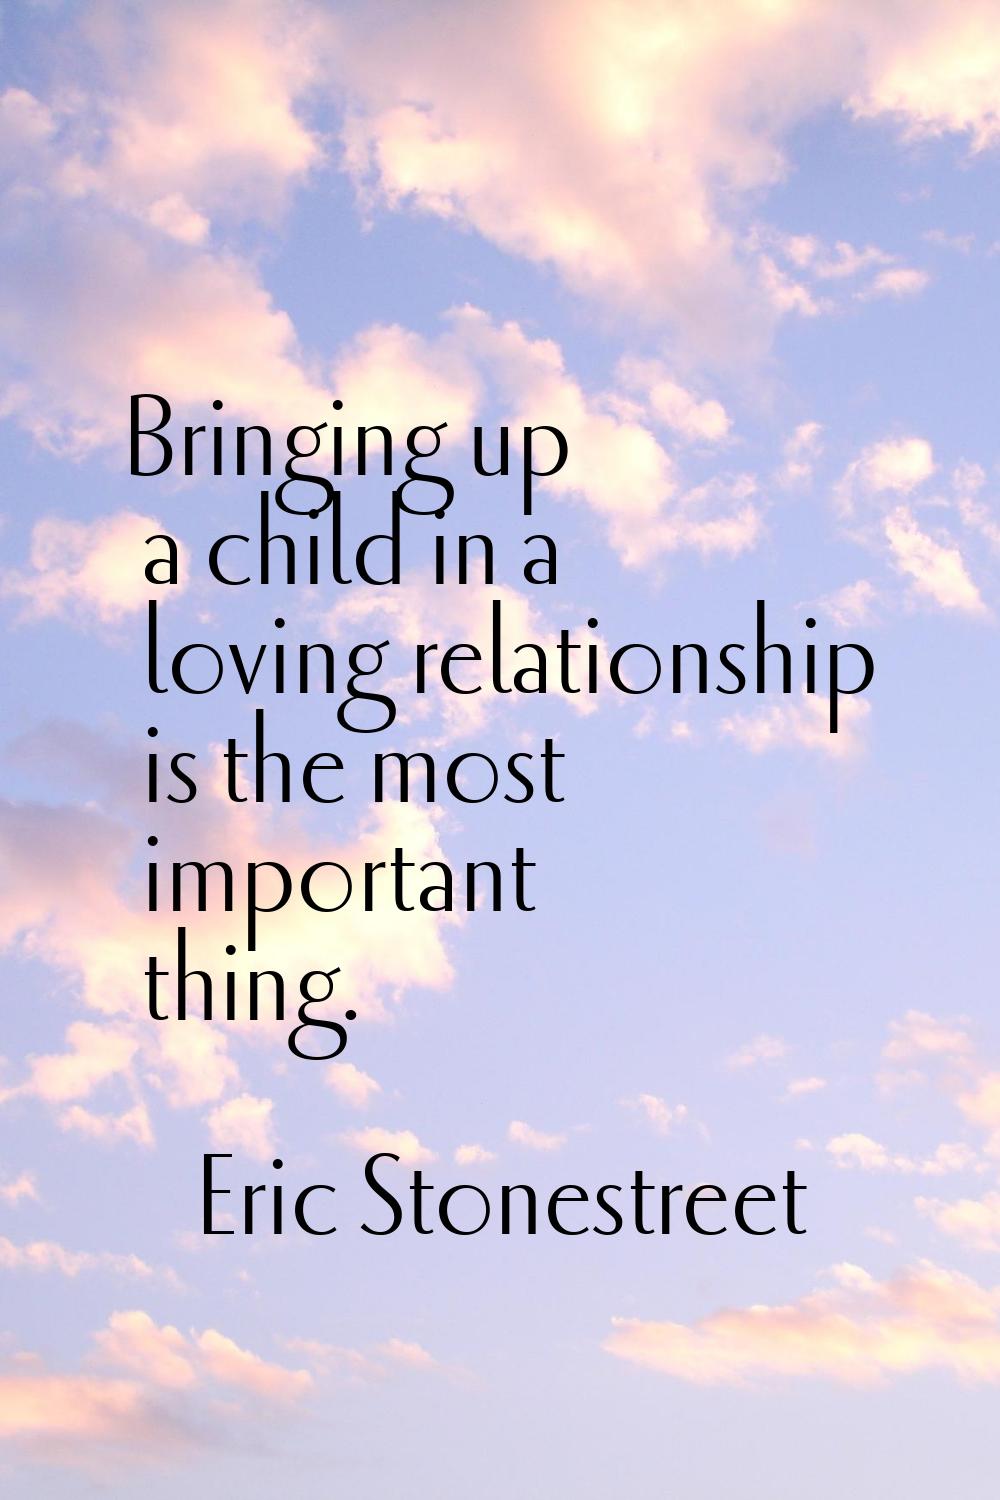 Bringing up a child in a loving relationship is the most important thing.